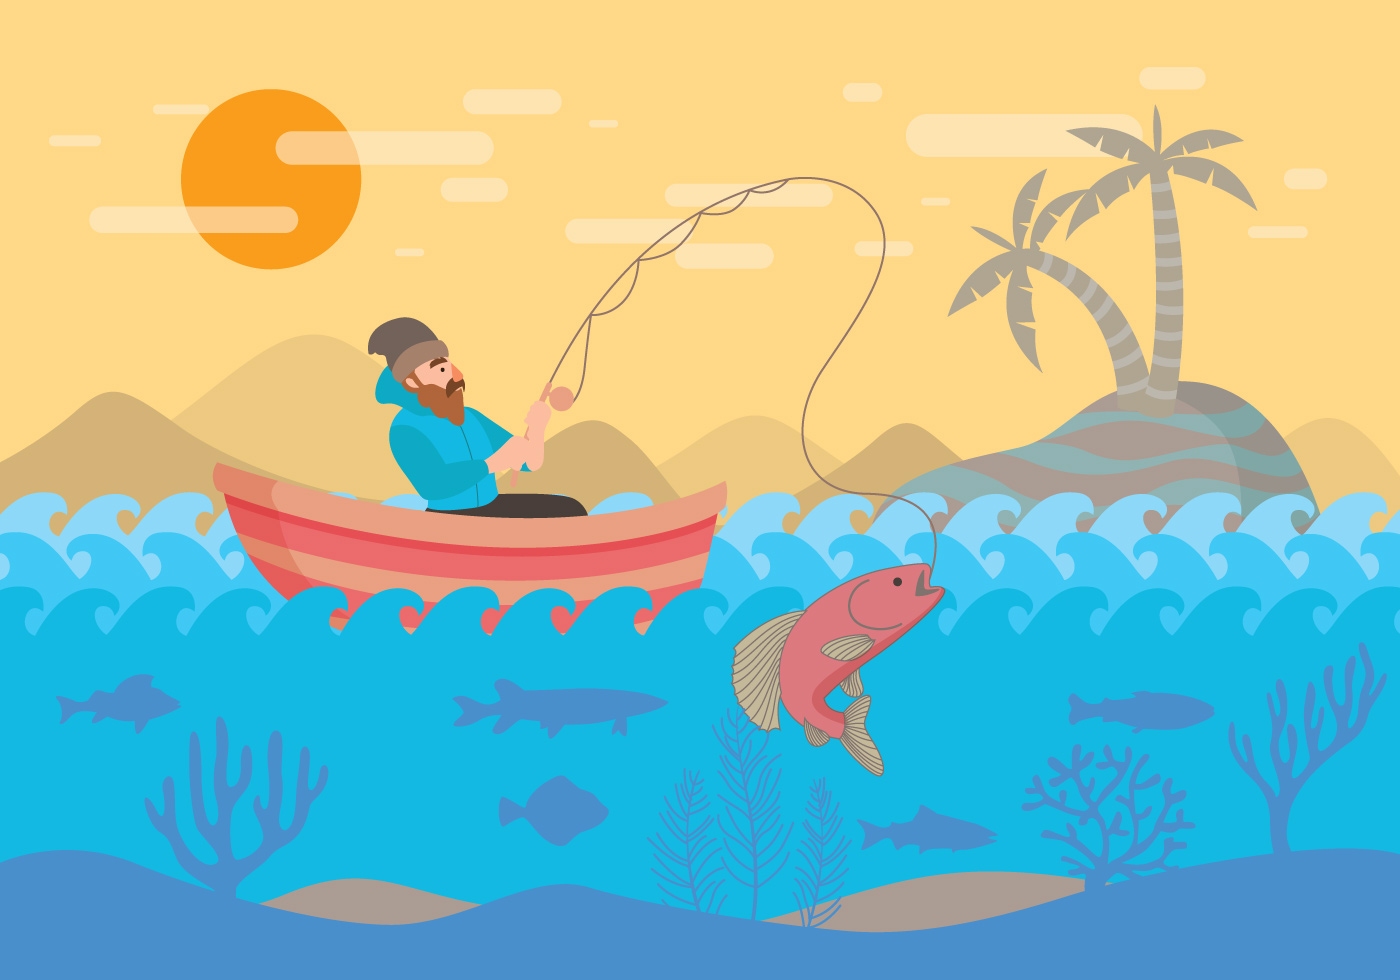 Download Fly Fishing with Boat Vector - Download Free Vectors ...